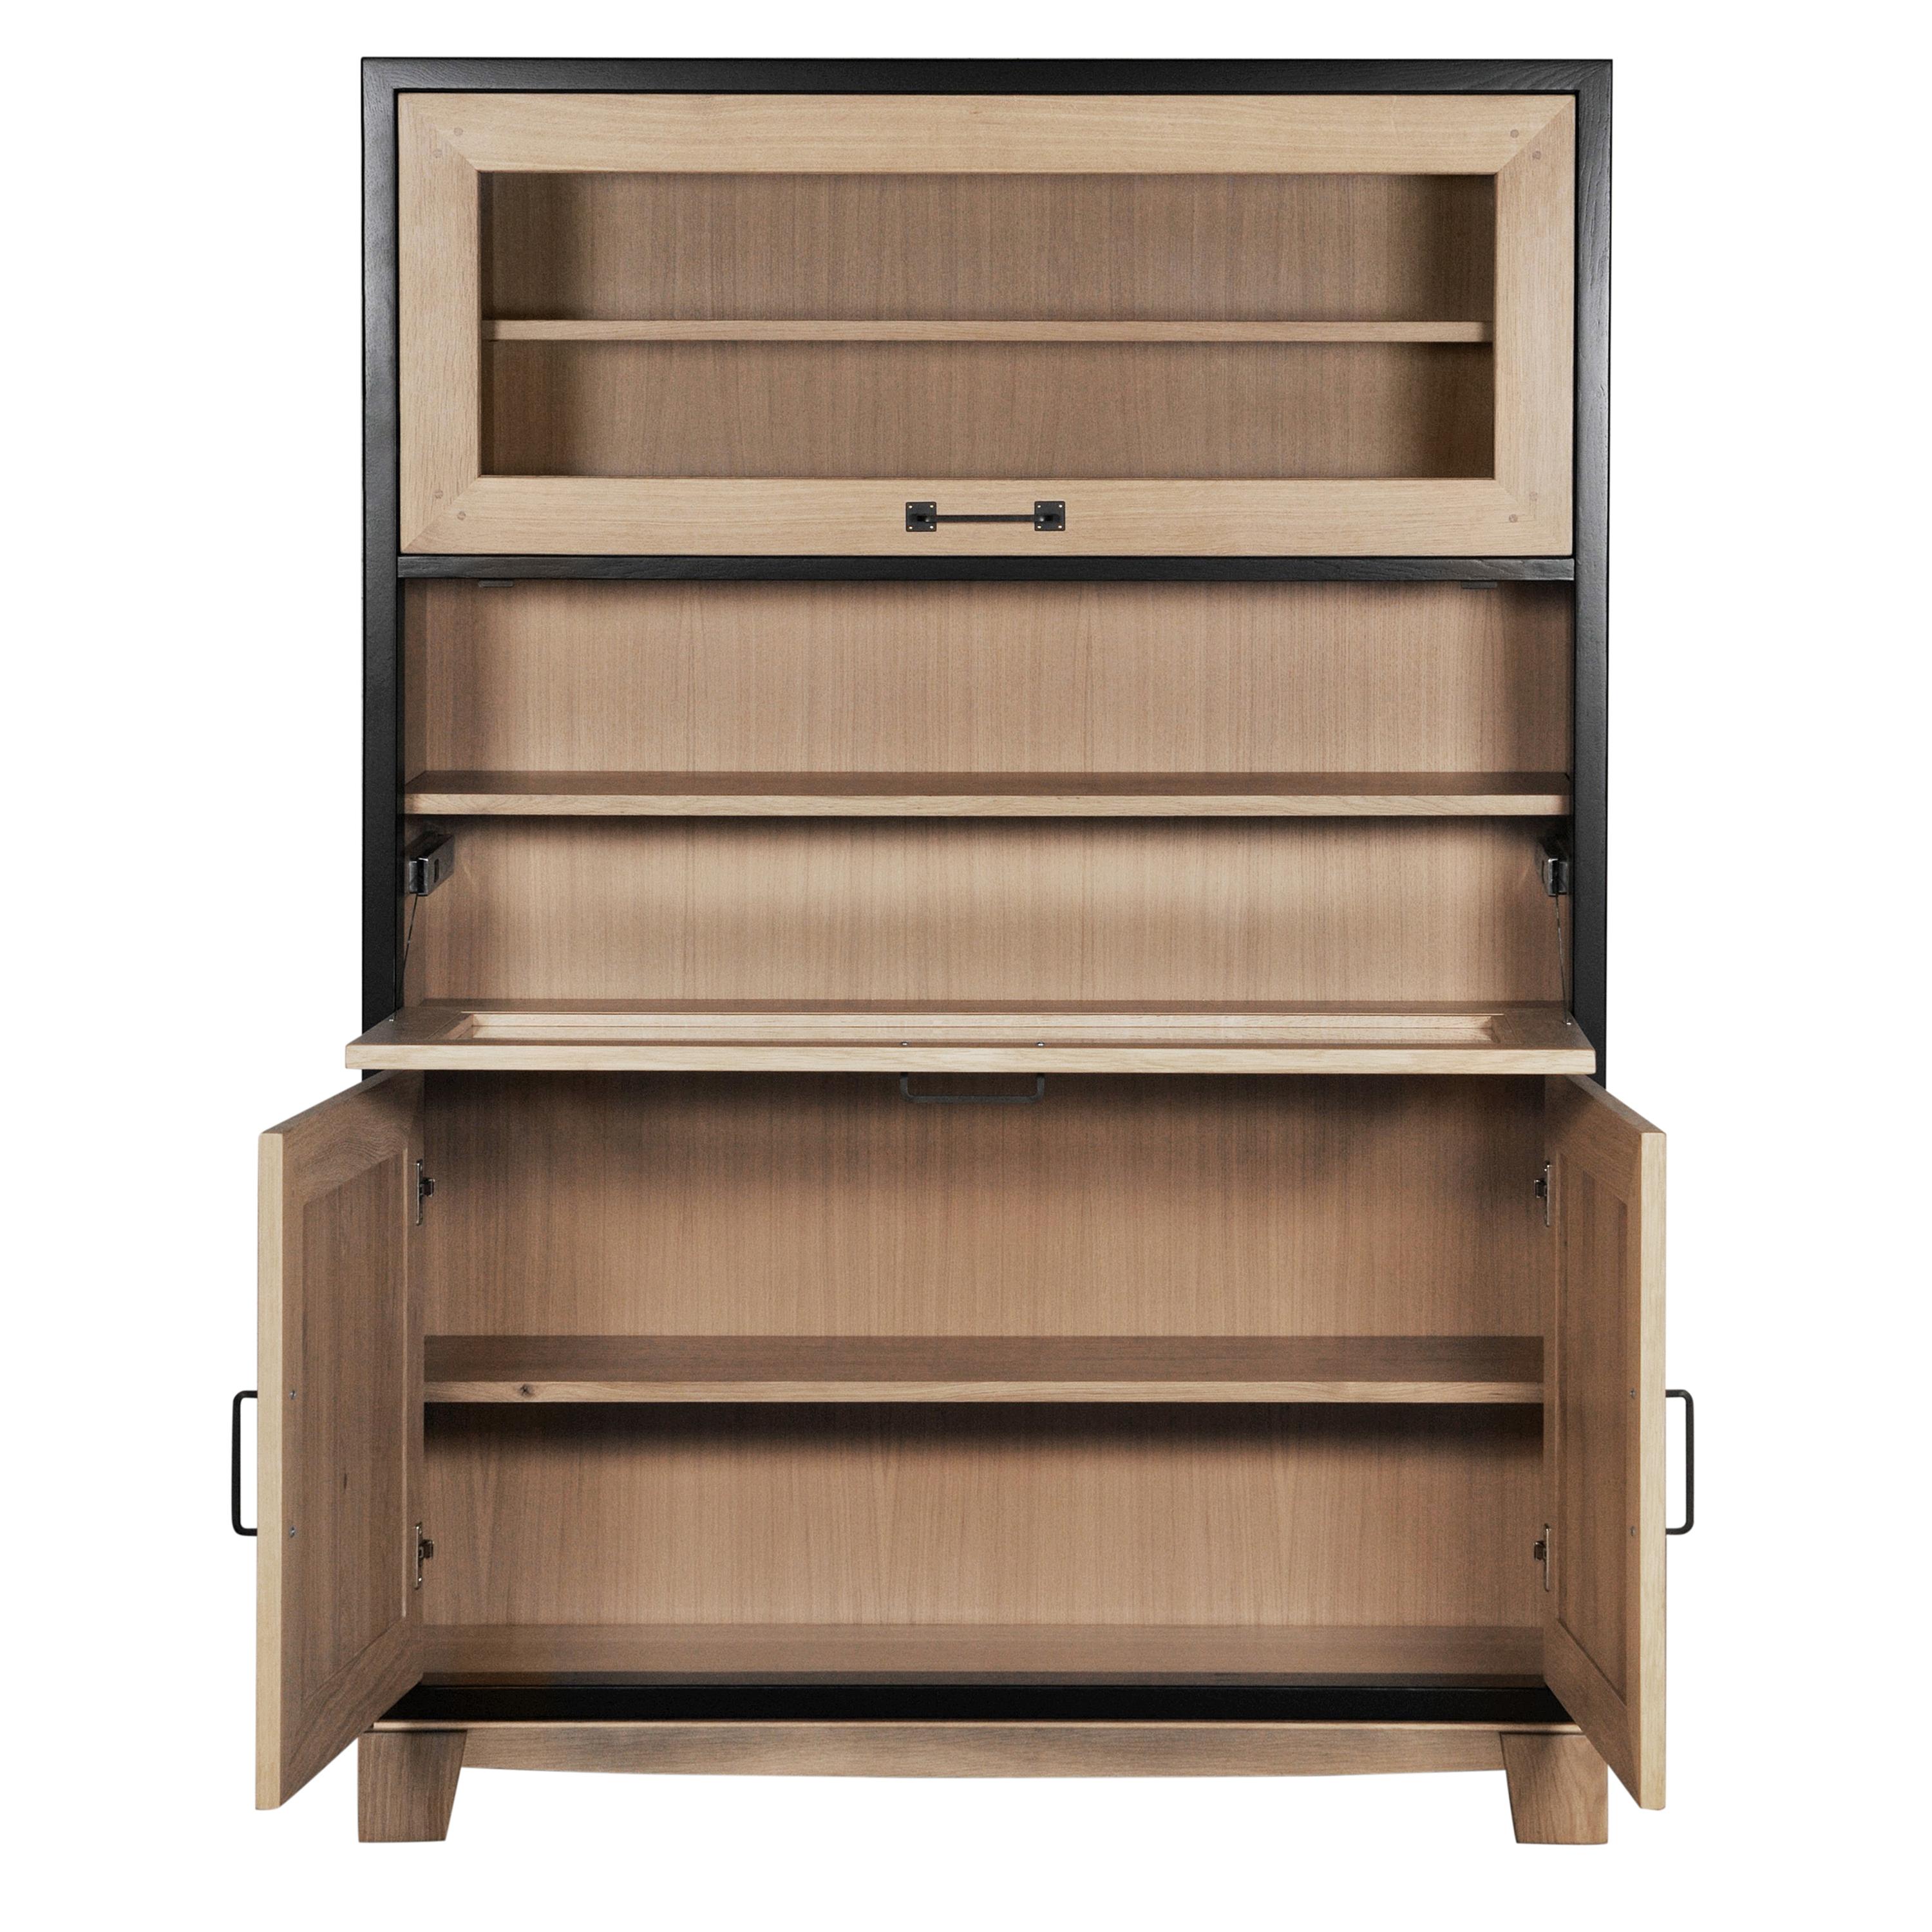 SIENNA Collection 
This bookcase is part of the contemporary collection SIENNA designed by Christophe Lecomte in Vendée. SIENNA is characterized by taut lines slightly softened by curved handles or drawers.
The oak, a noble species from the French